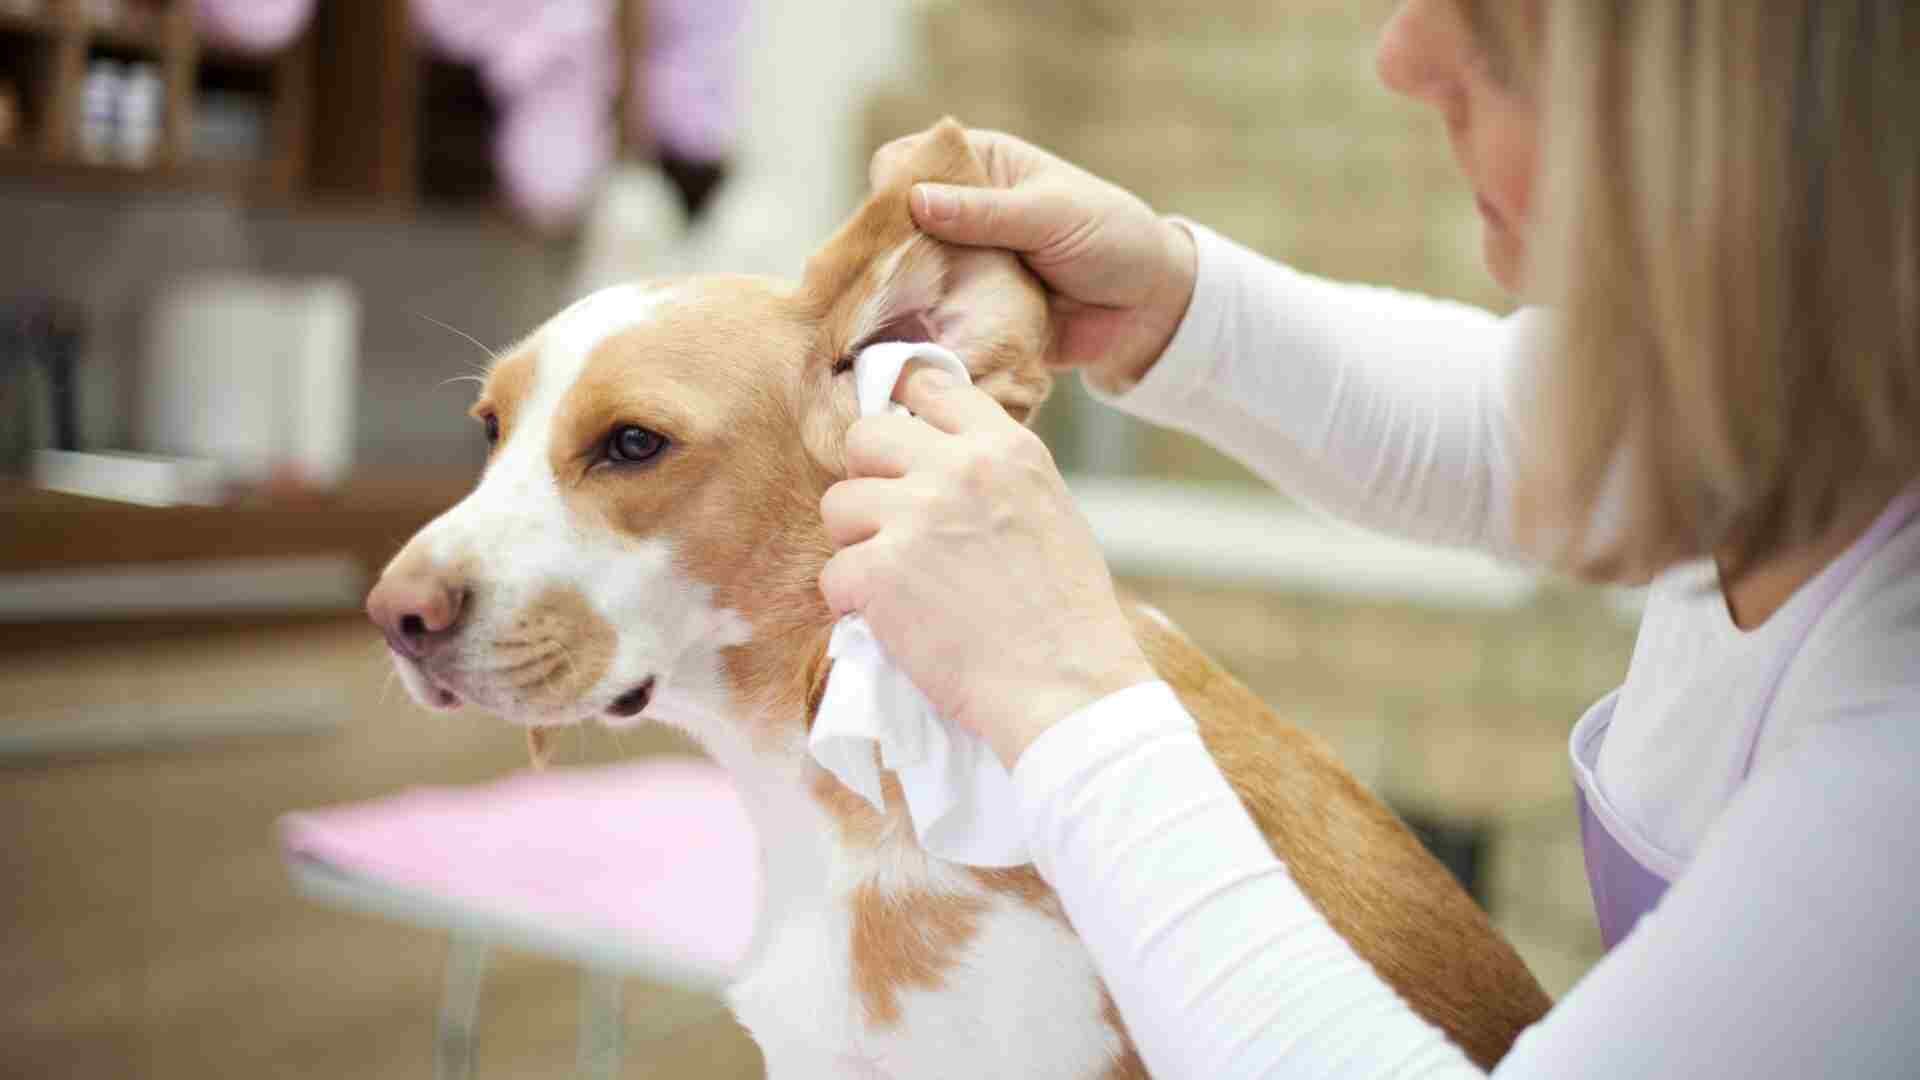 Dog Shaking Head After Ear Cleaning: What to Do Guide